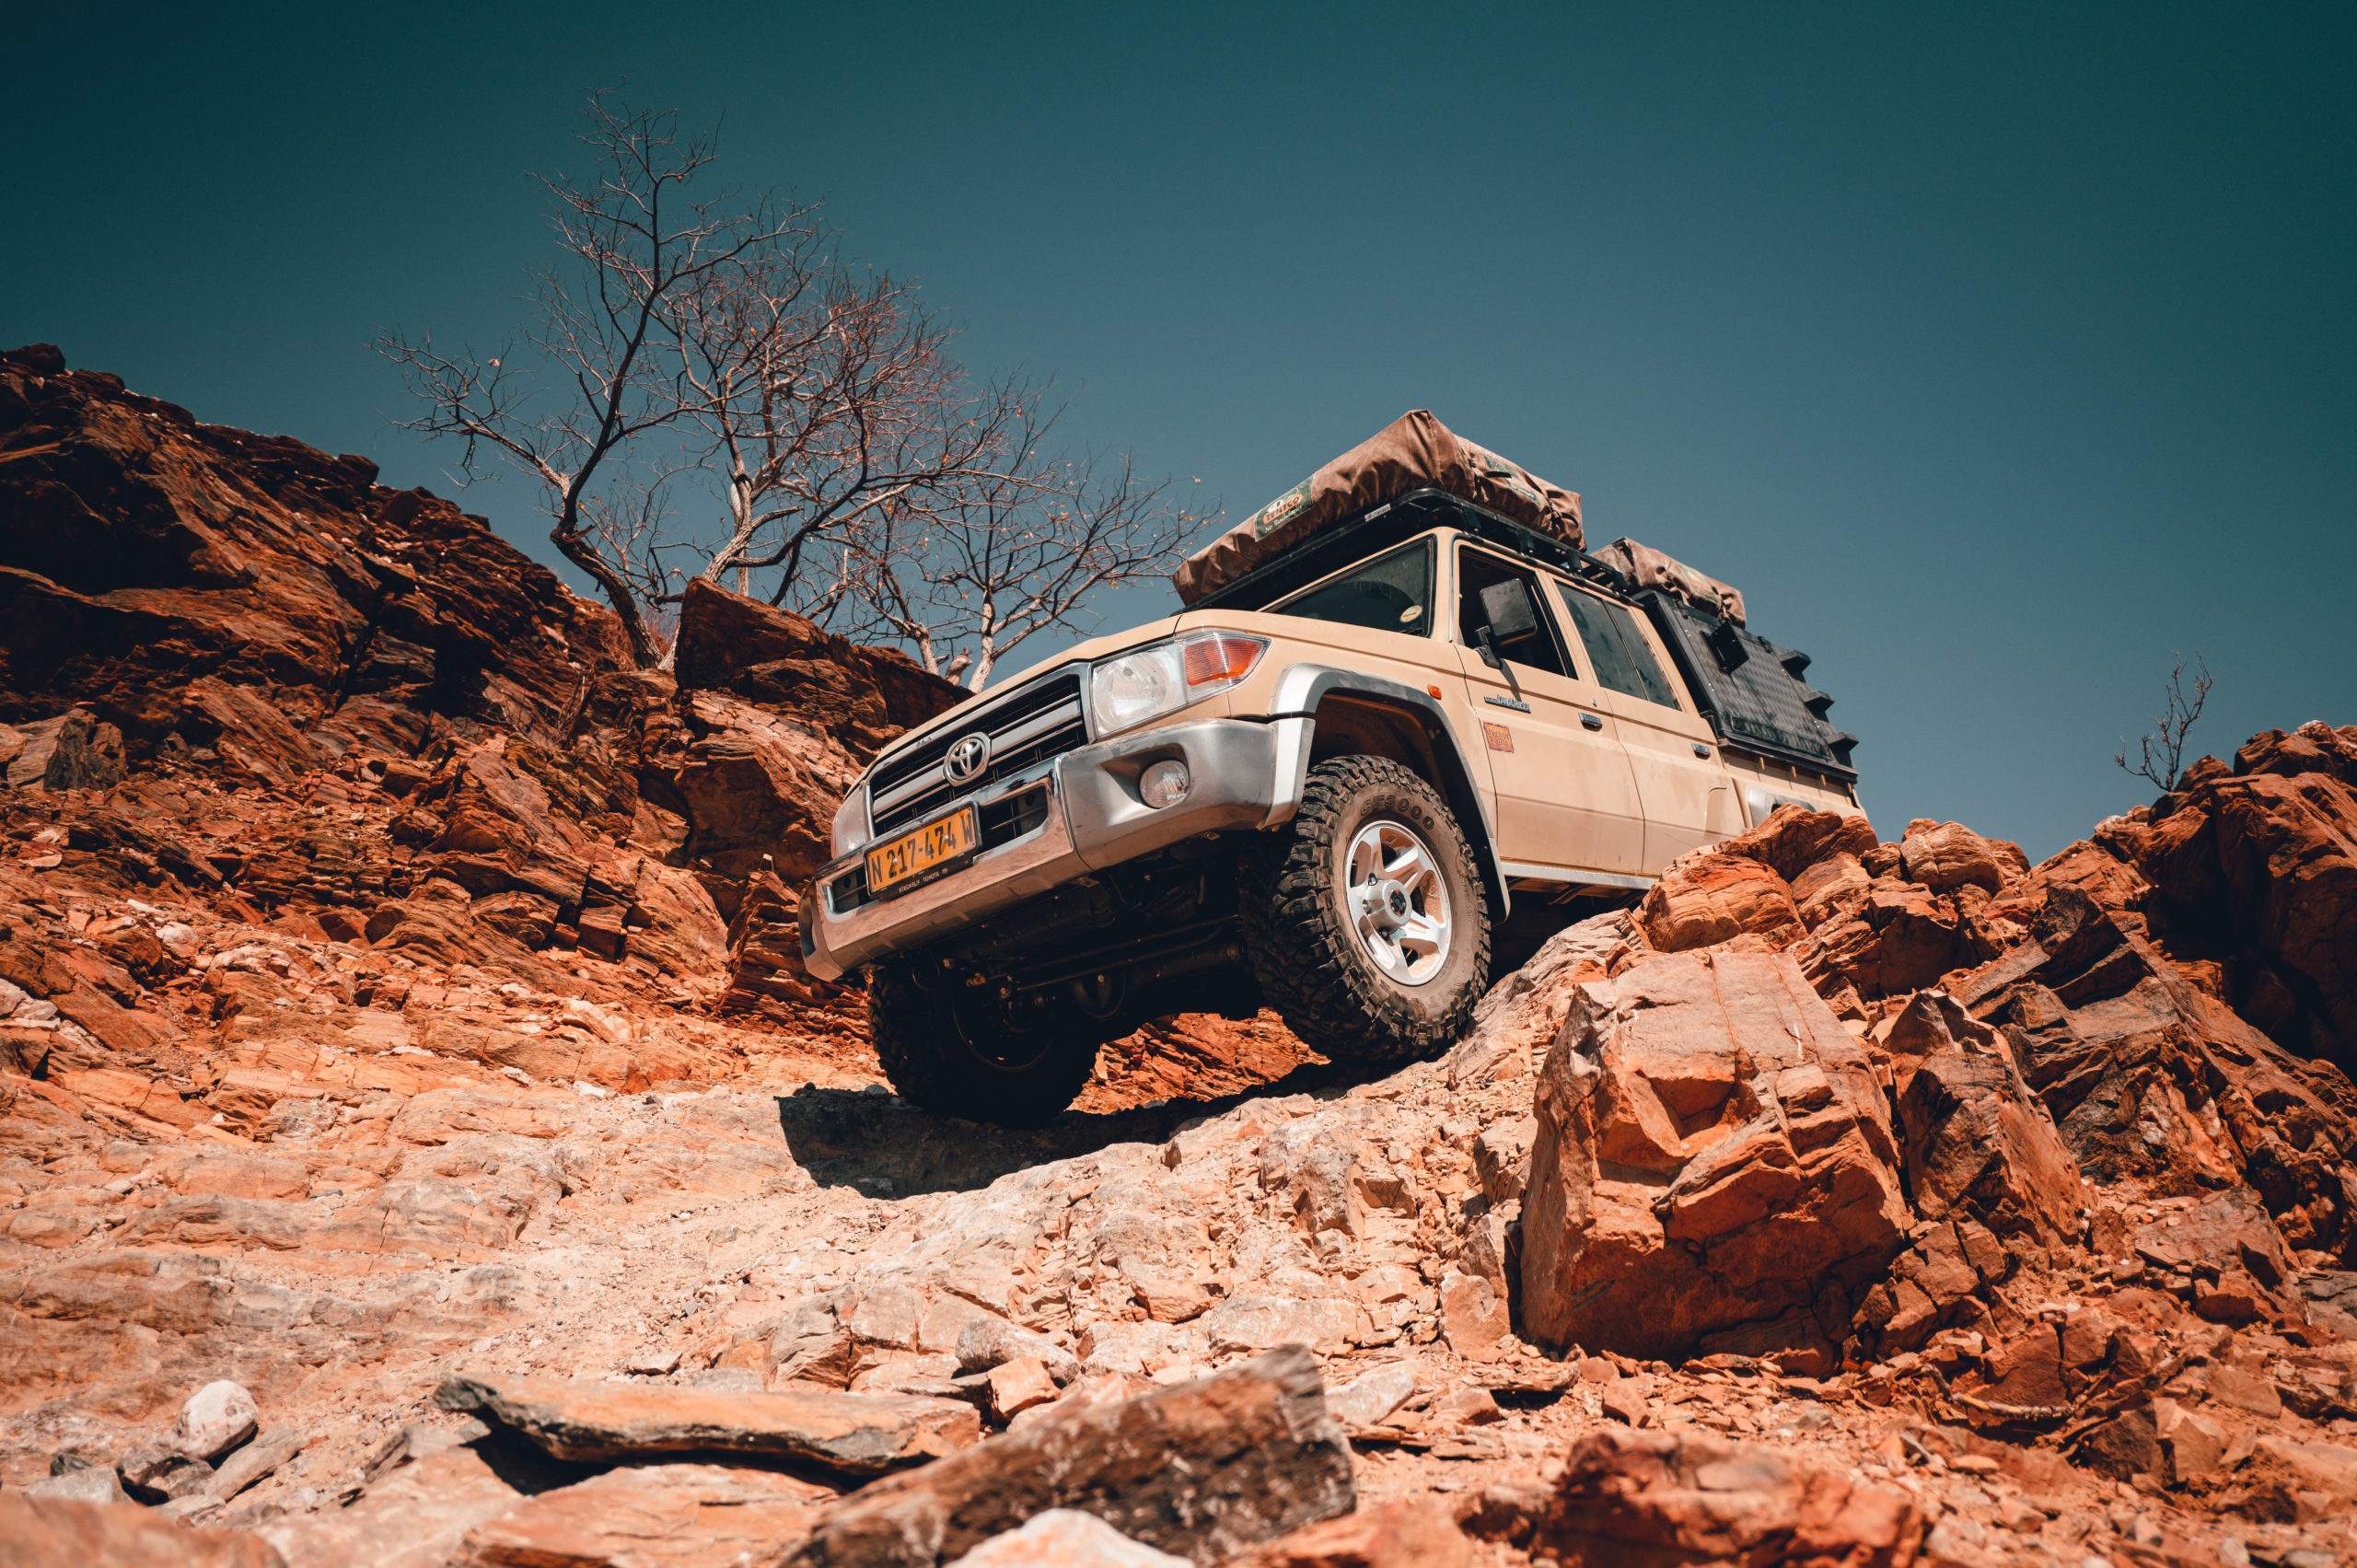 toyota-landcruiser-driving-van-zyls-pass-photo-by-matej-smucr-scaled